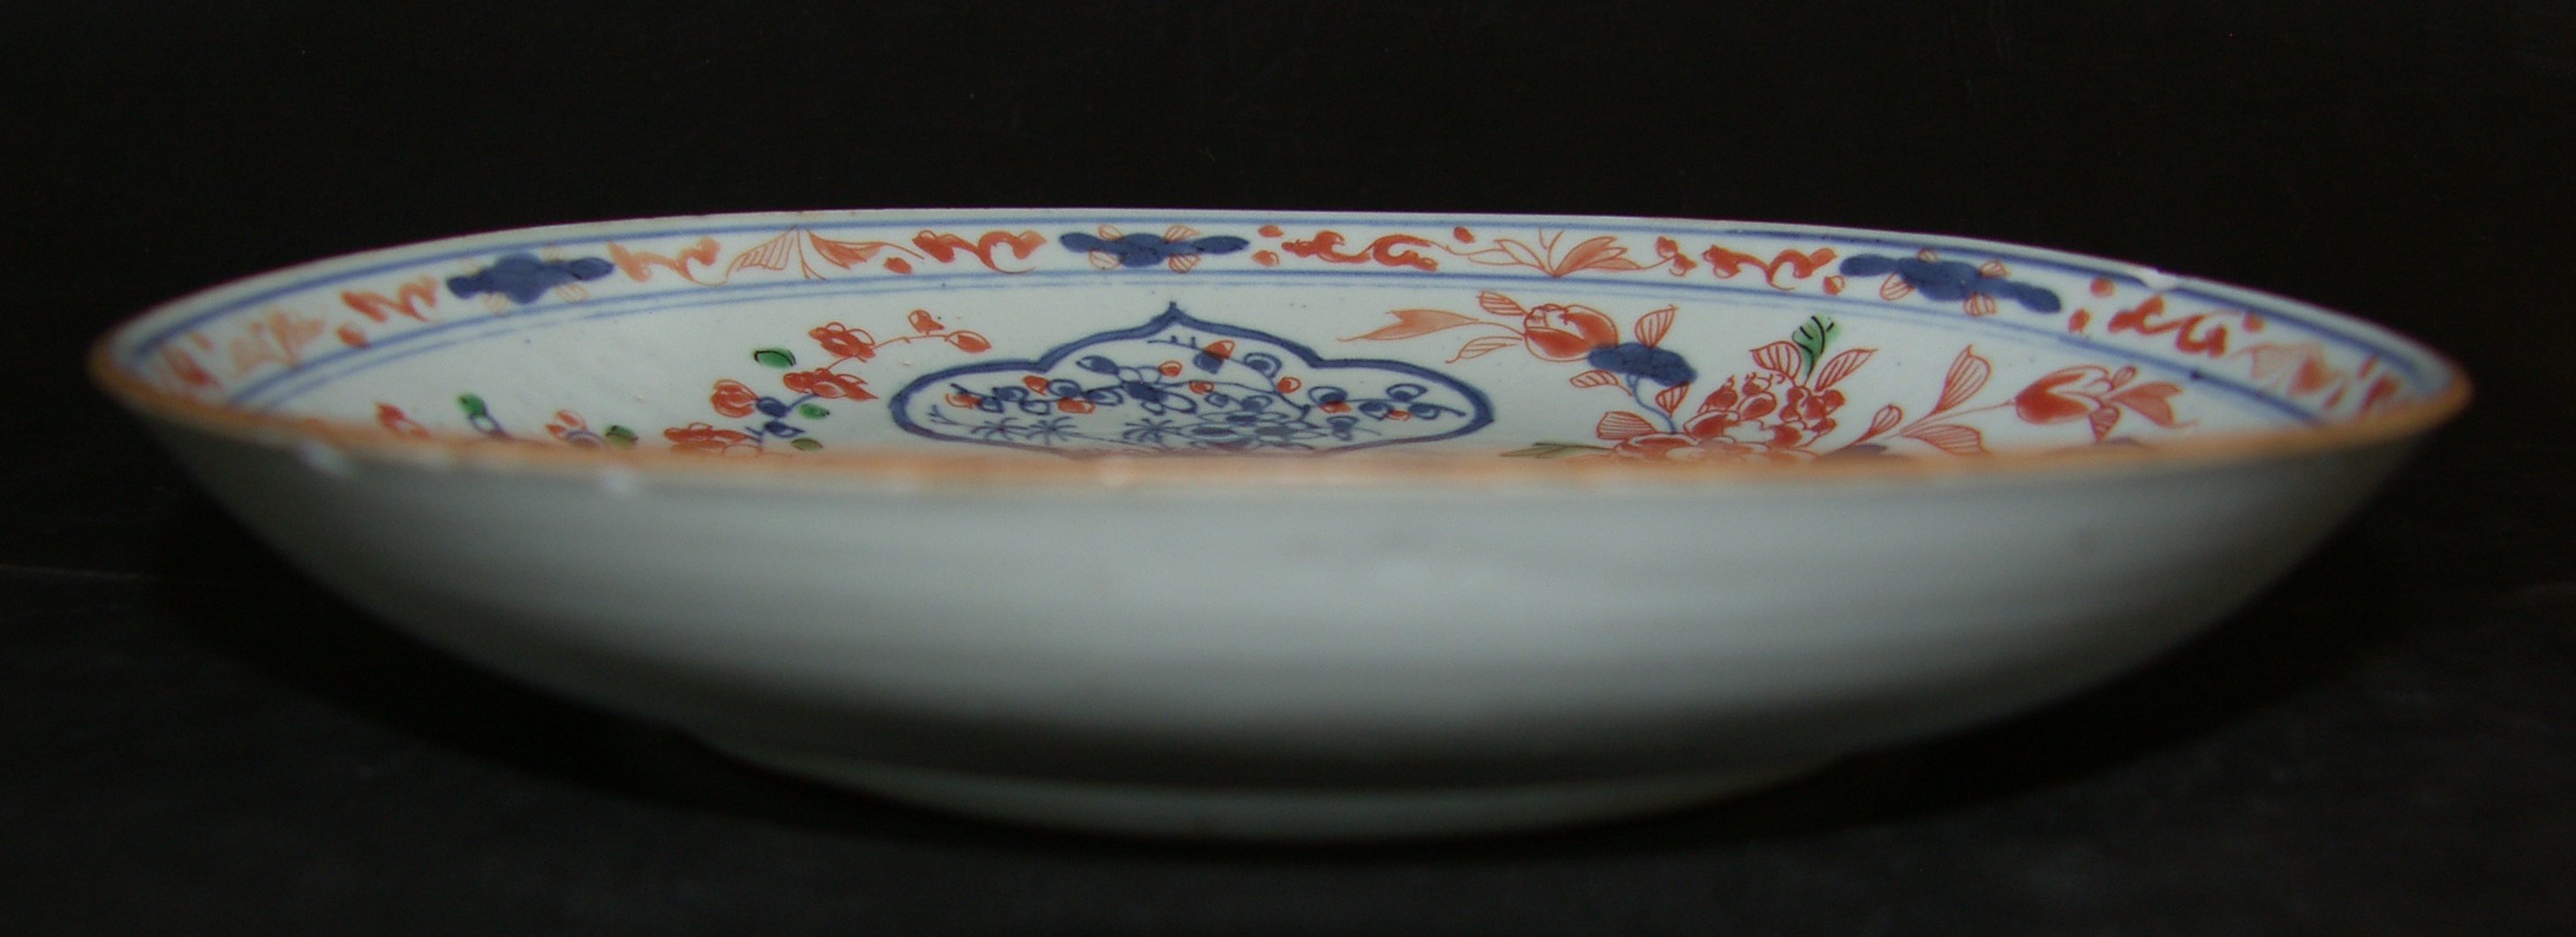 Transitional plate,  ( 1621 -1684 )